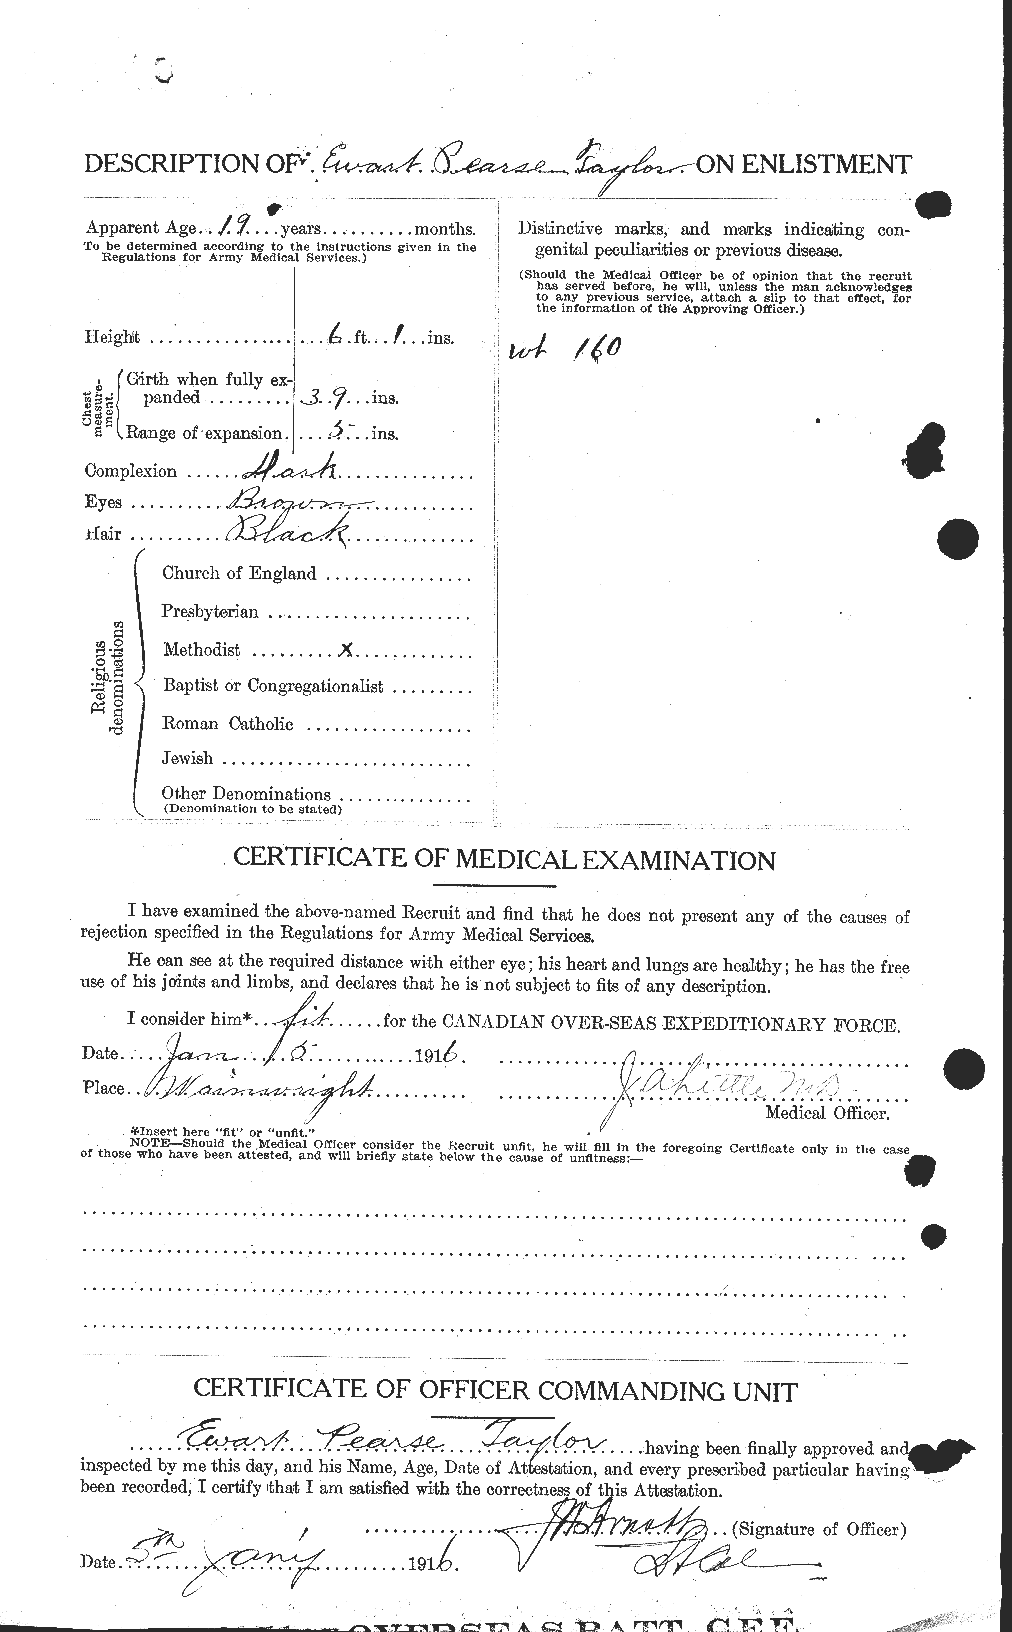 Personnel Records of the First World War - CEF 627412b